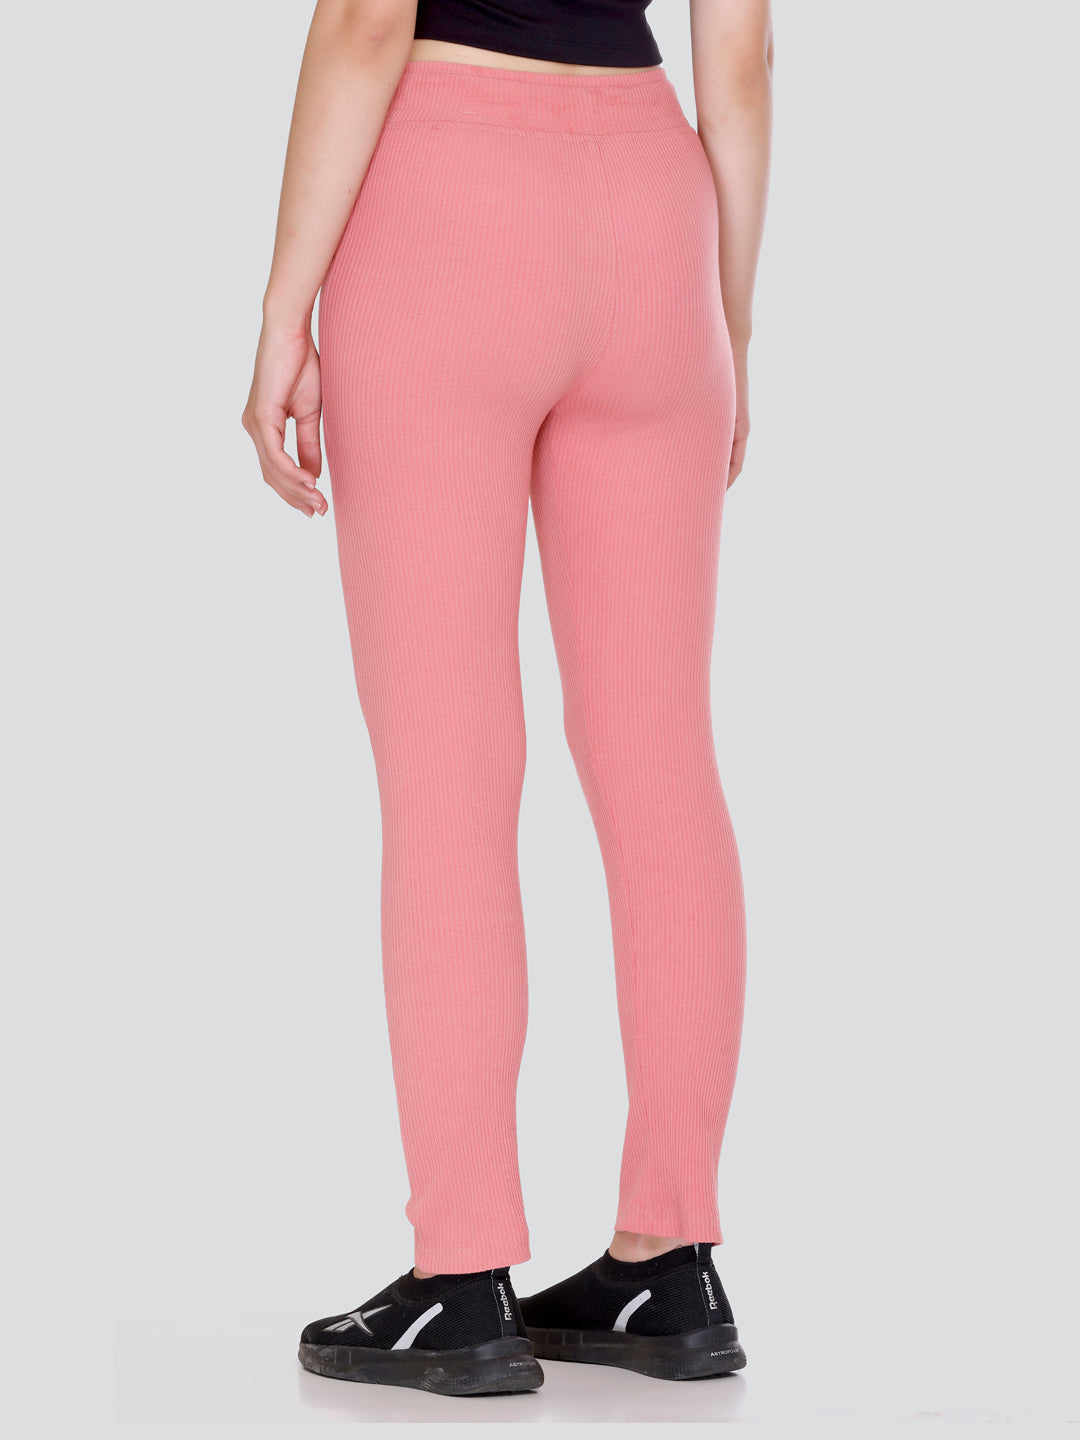 Buy Designer Gym Wear Track Pant Wholesale Online Collection - Eclothing